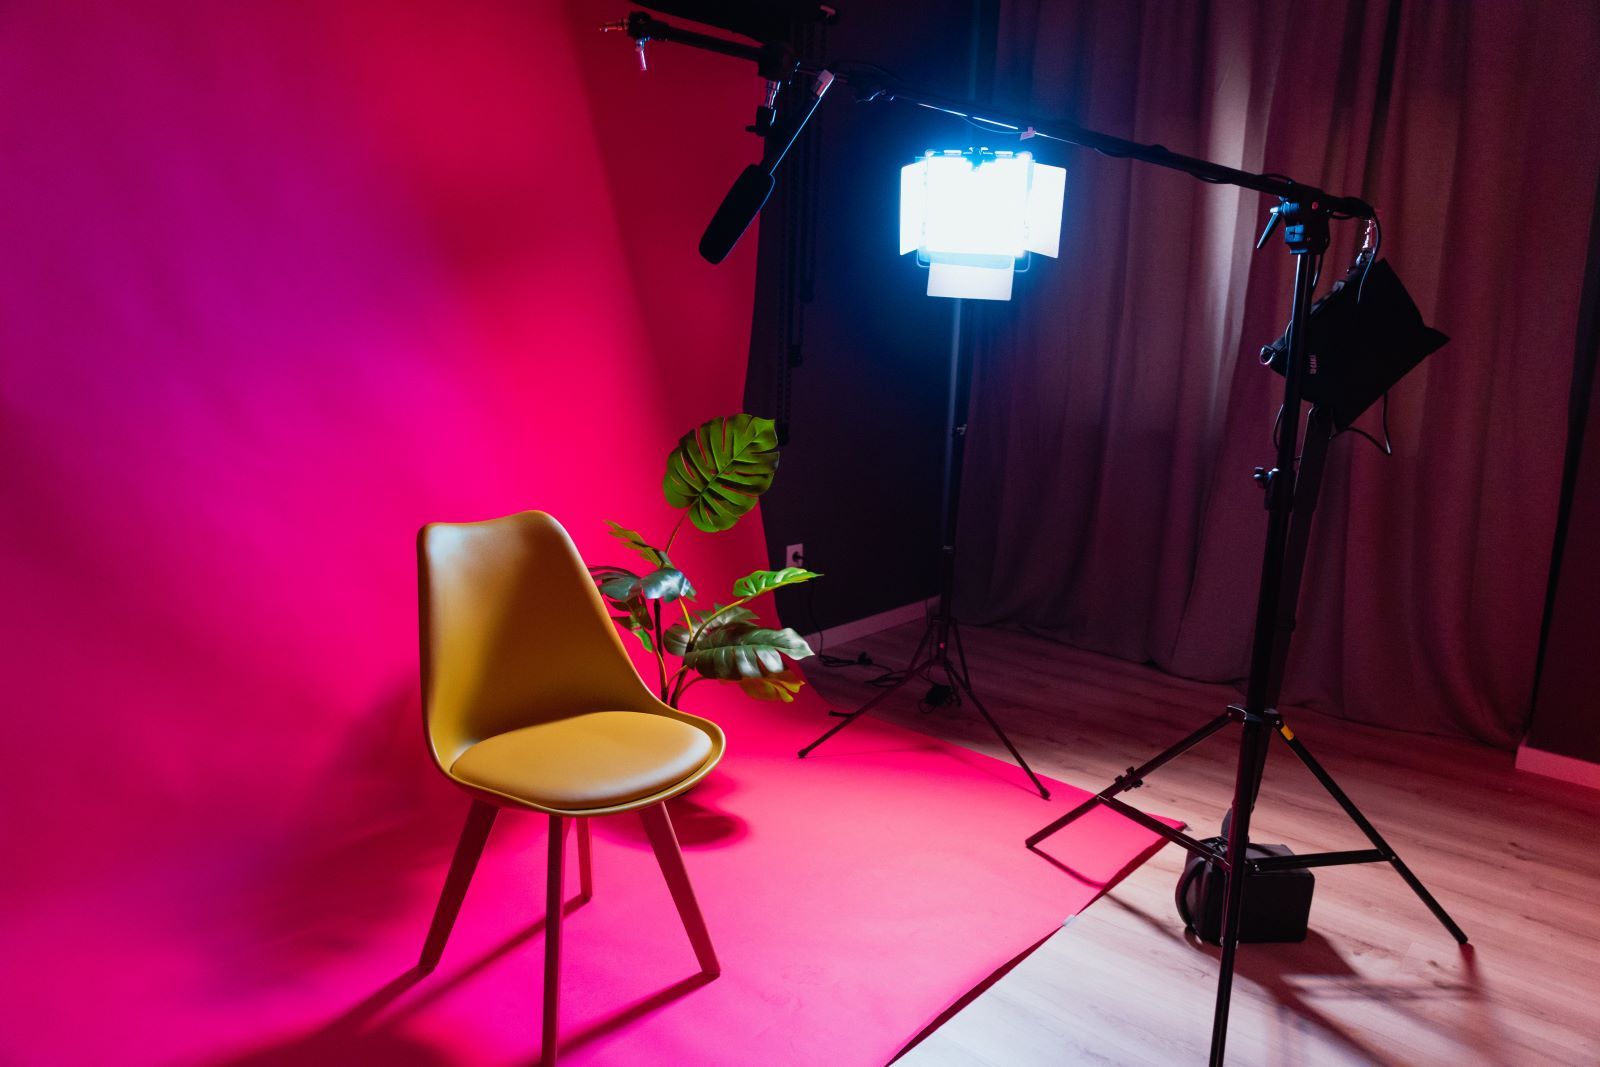 Video and teleprompter set up with pink background and yellow chair